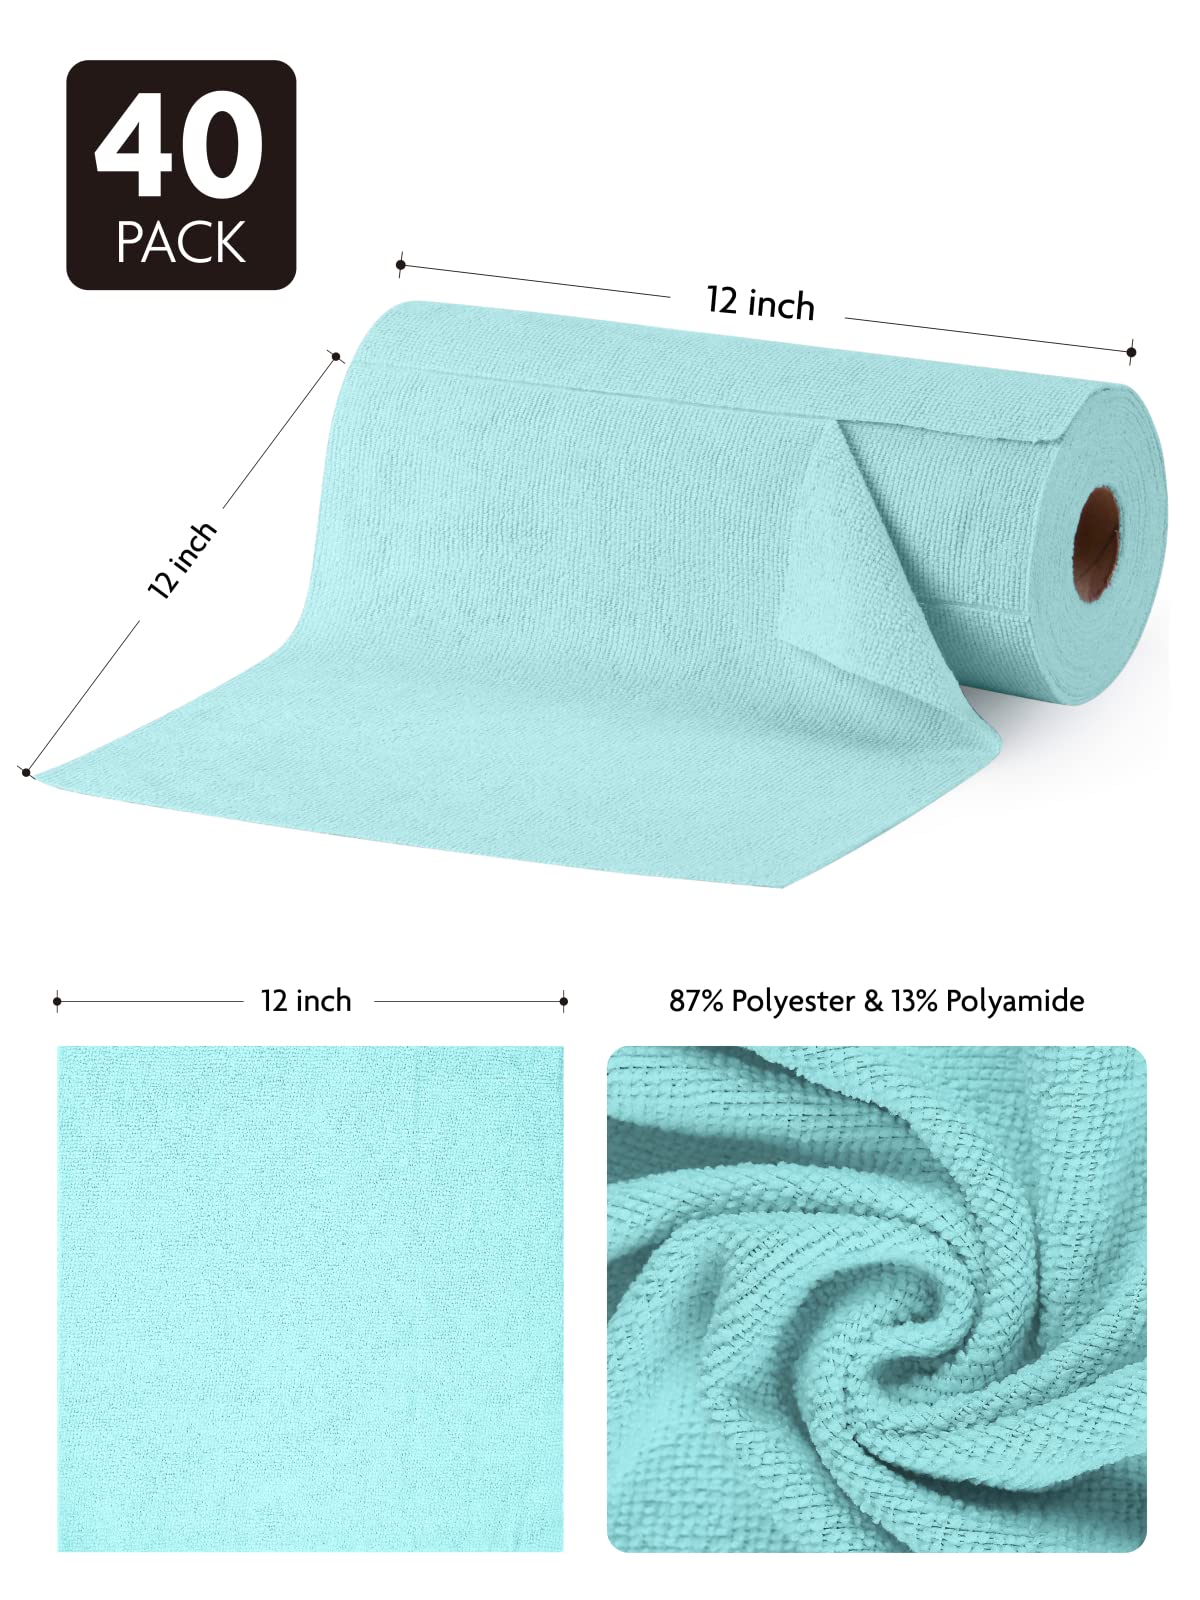 Tear-Away Cleaning Towels Roll Microfiber Dish Cloth Reusable